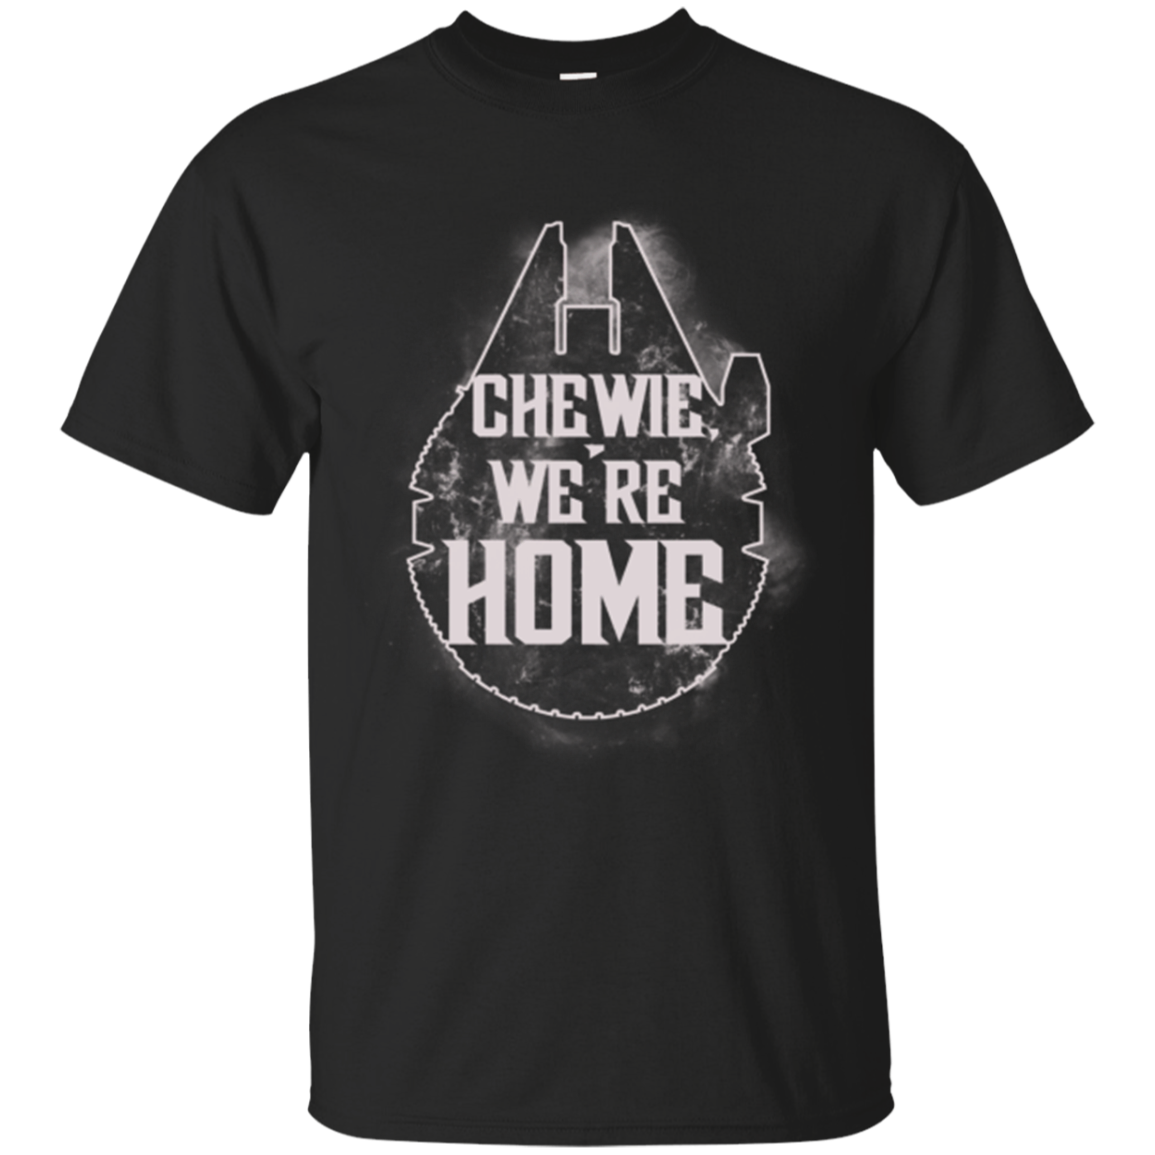 We're Home T-Shirt